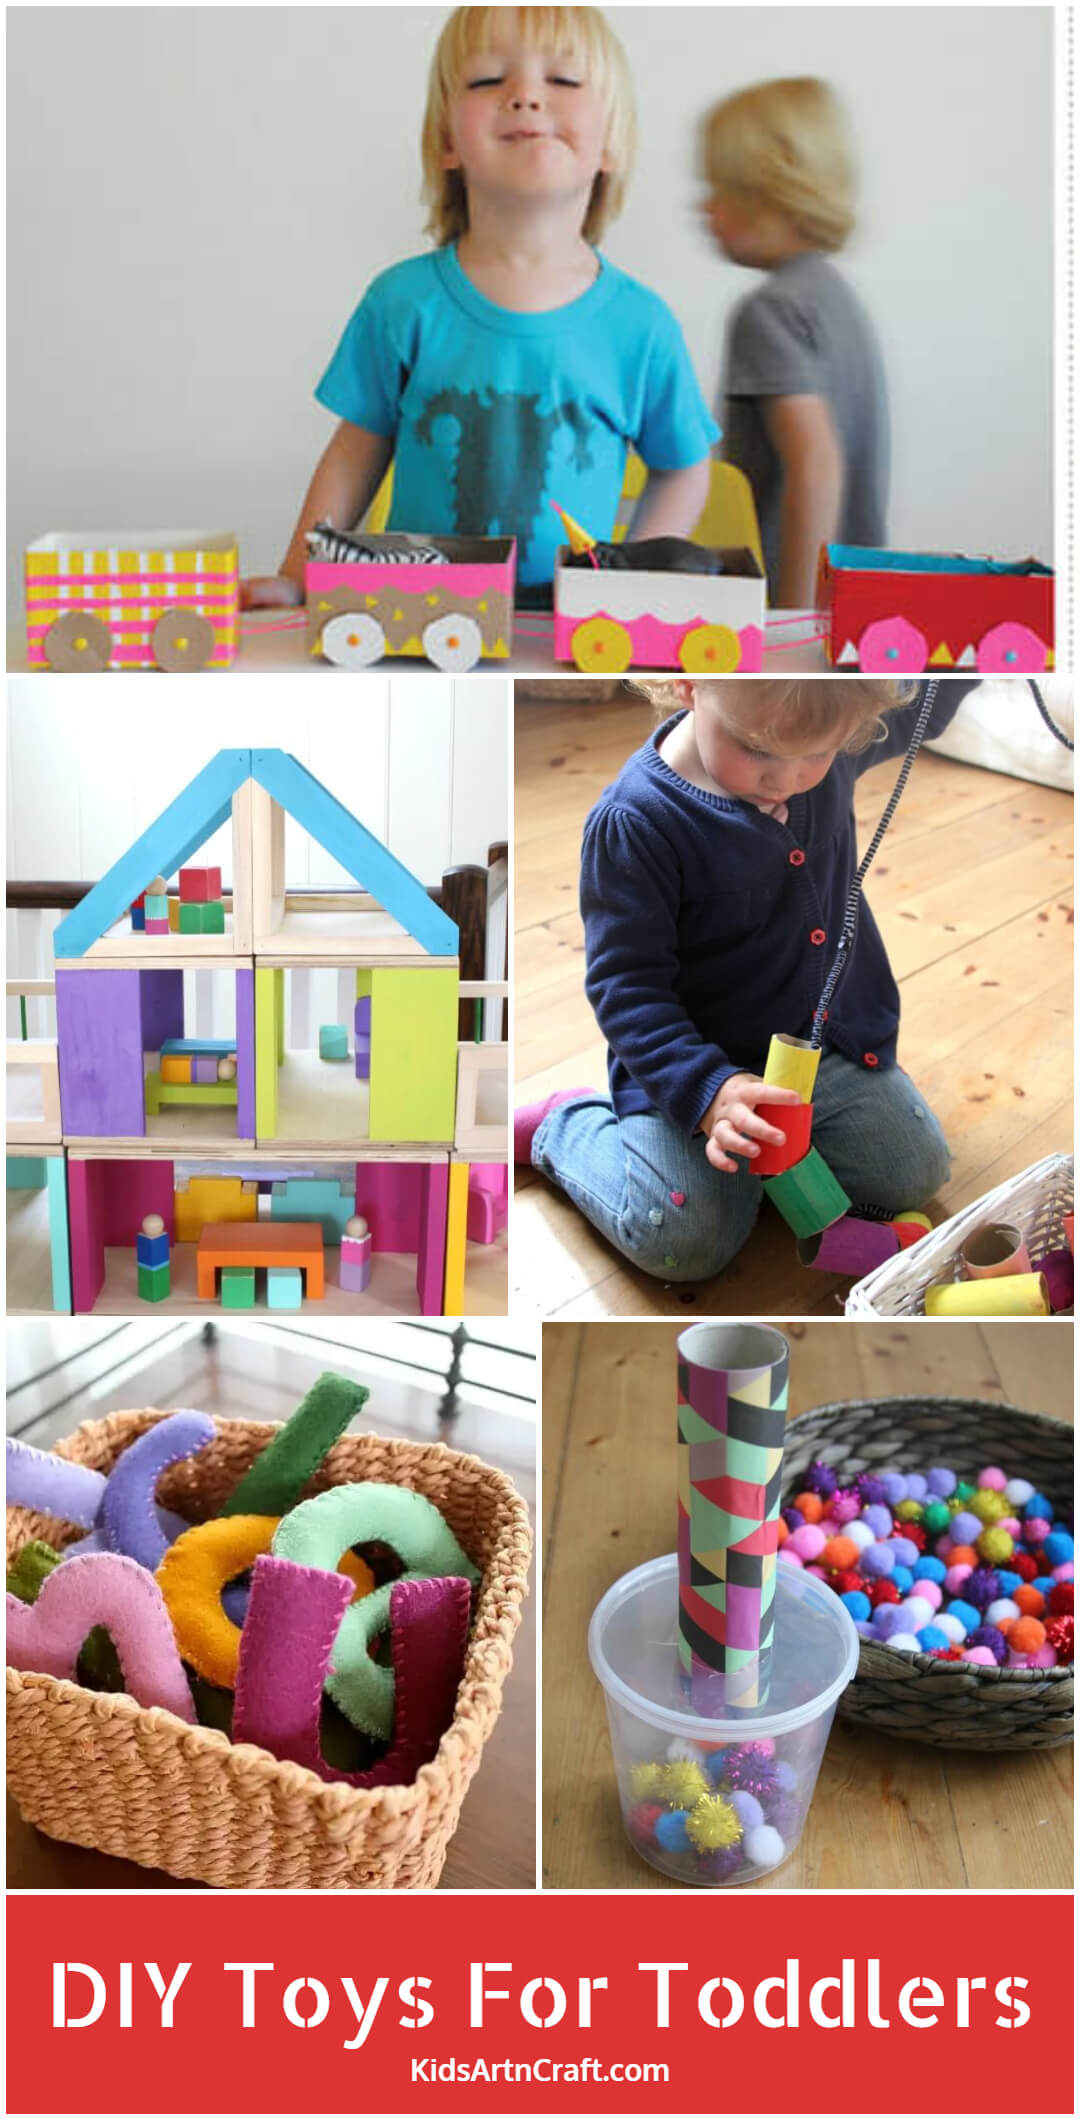 DIY Toys for Toddlers